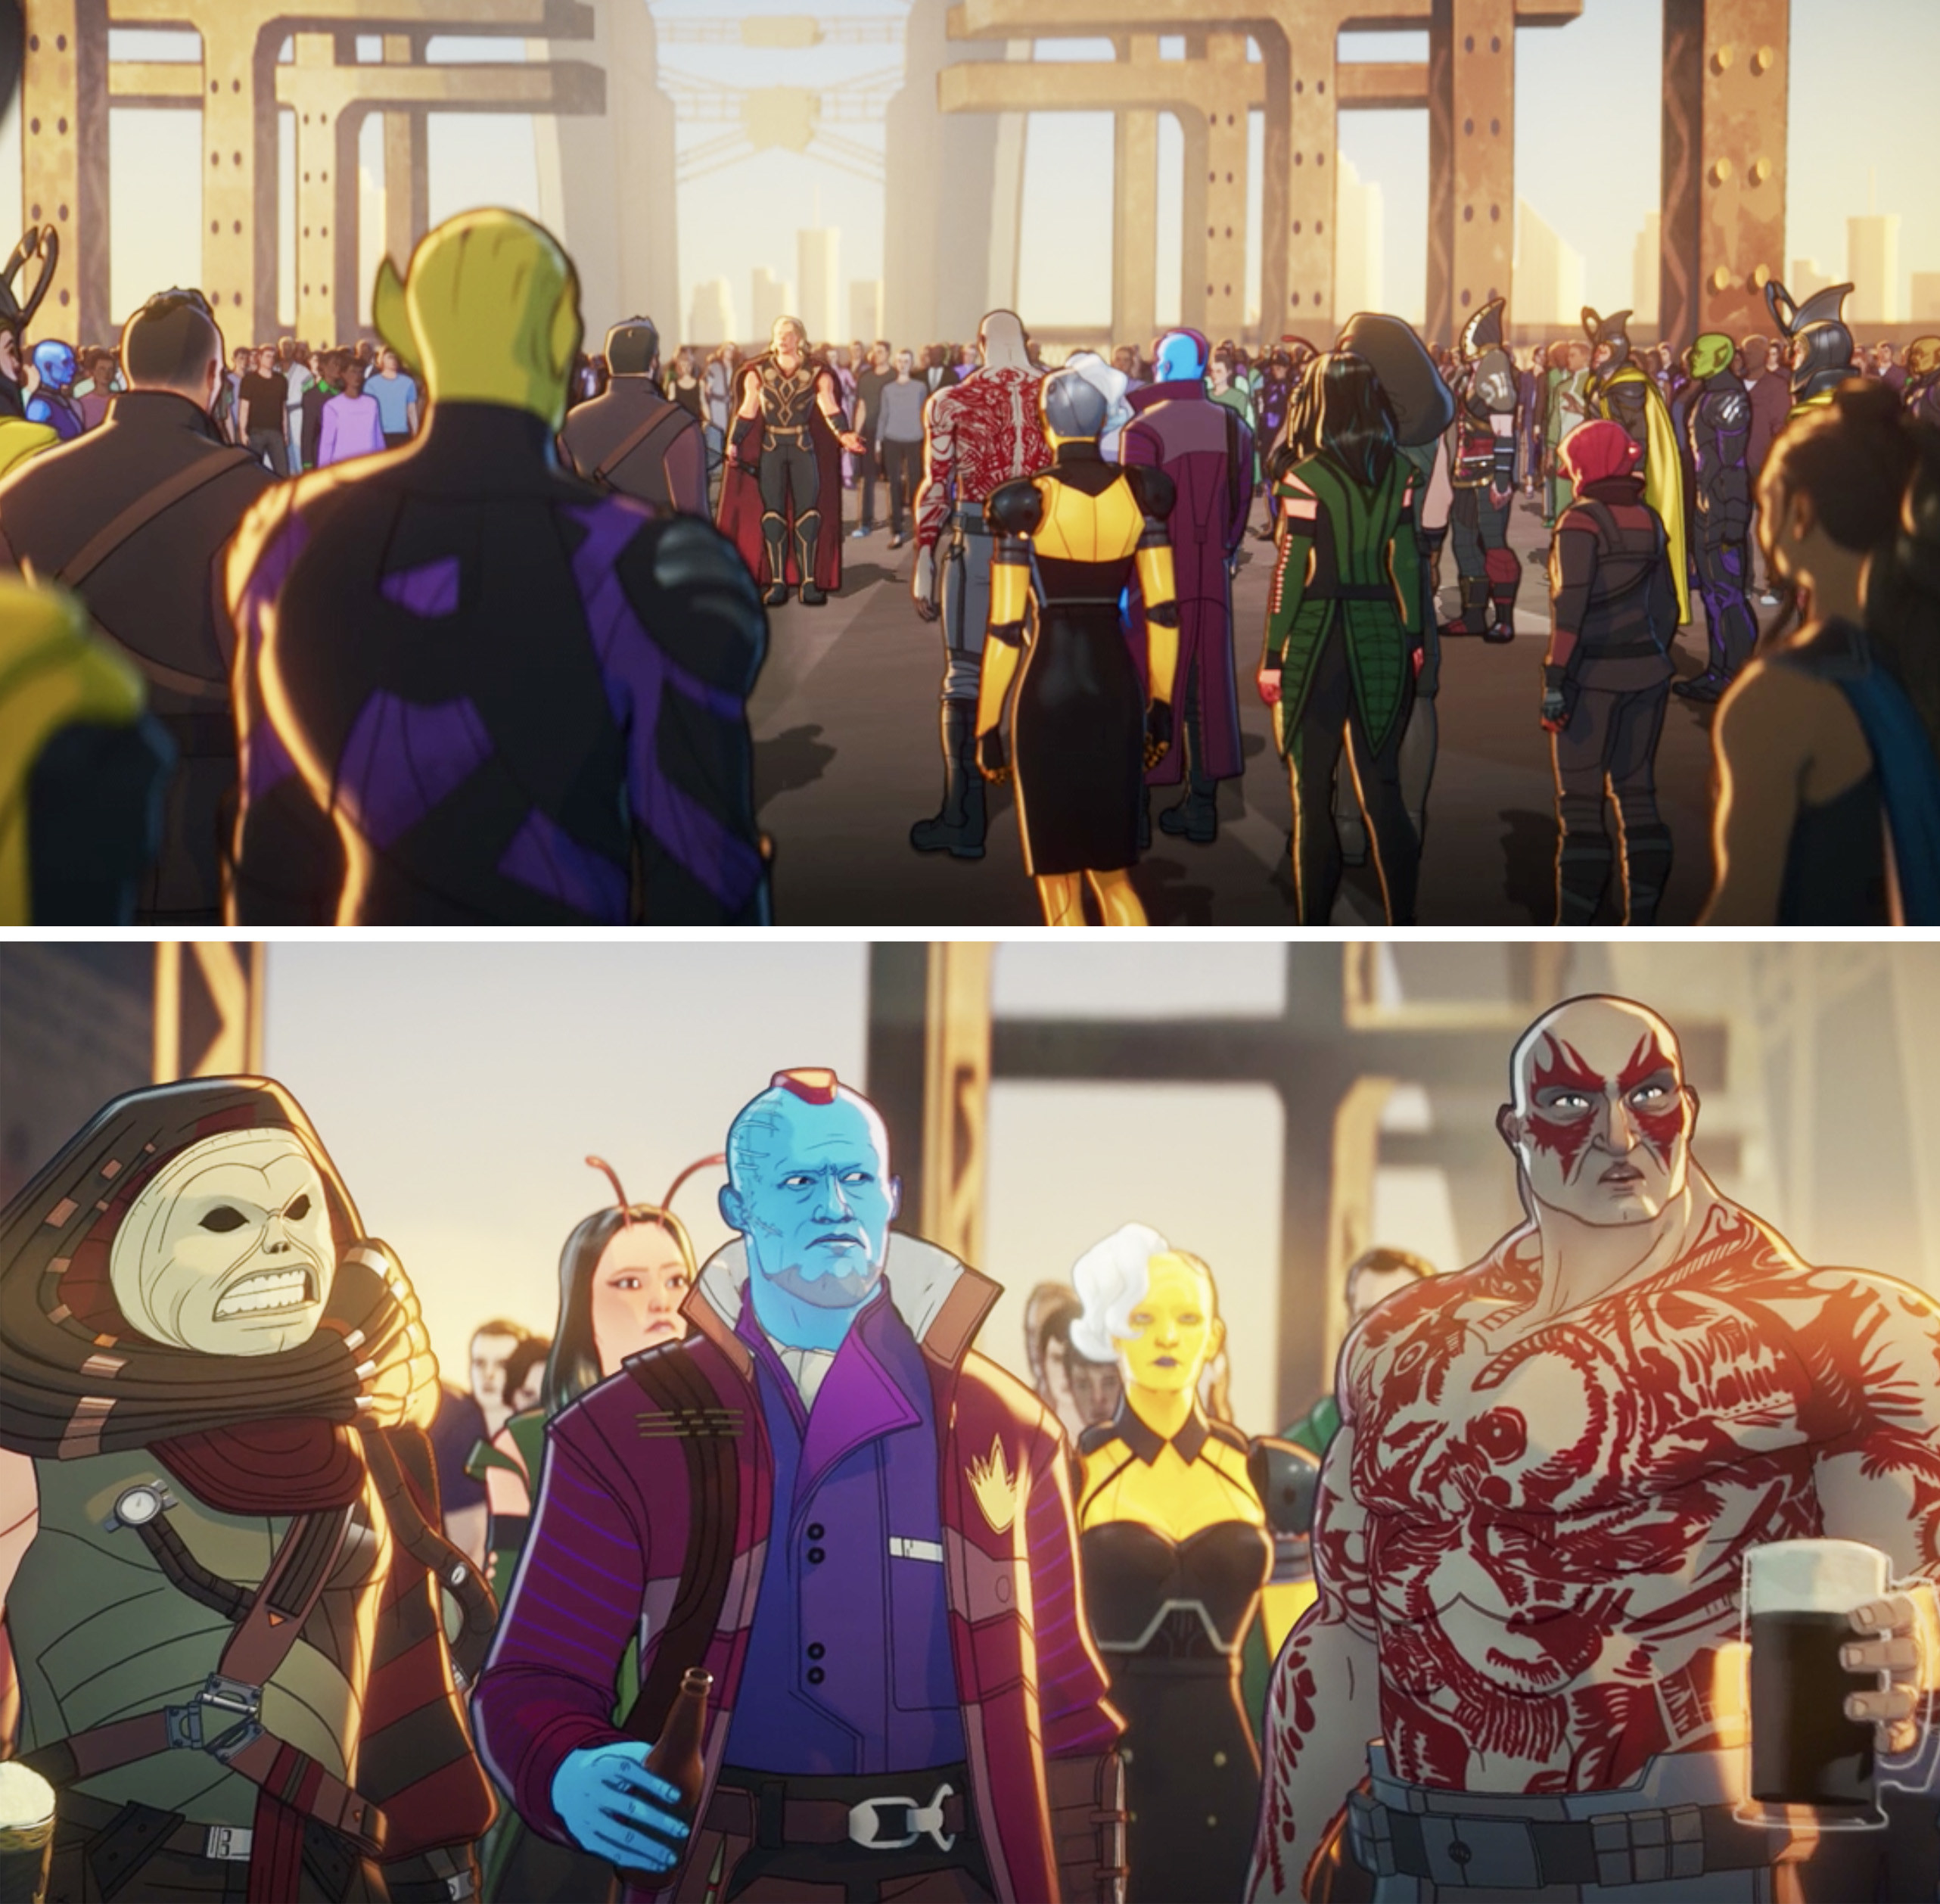 Back view of the animated crowd vs front view showing Yondu standing next to Drax